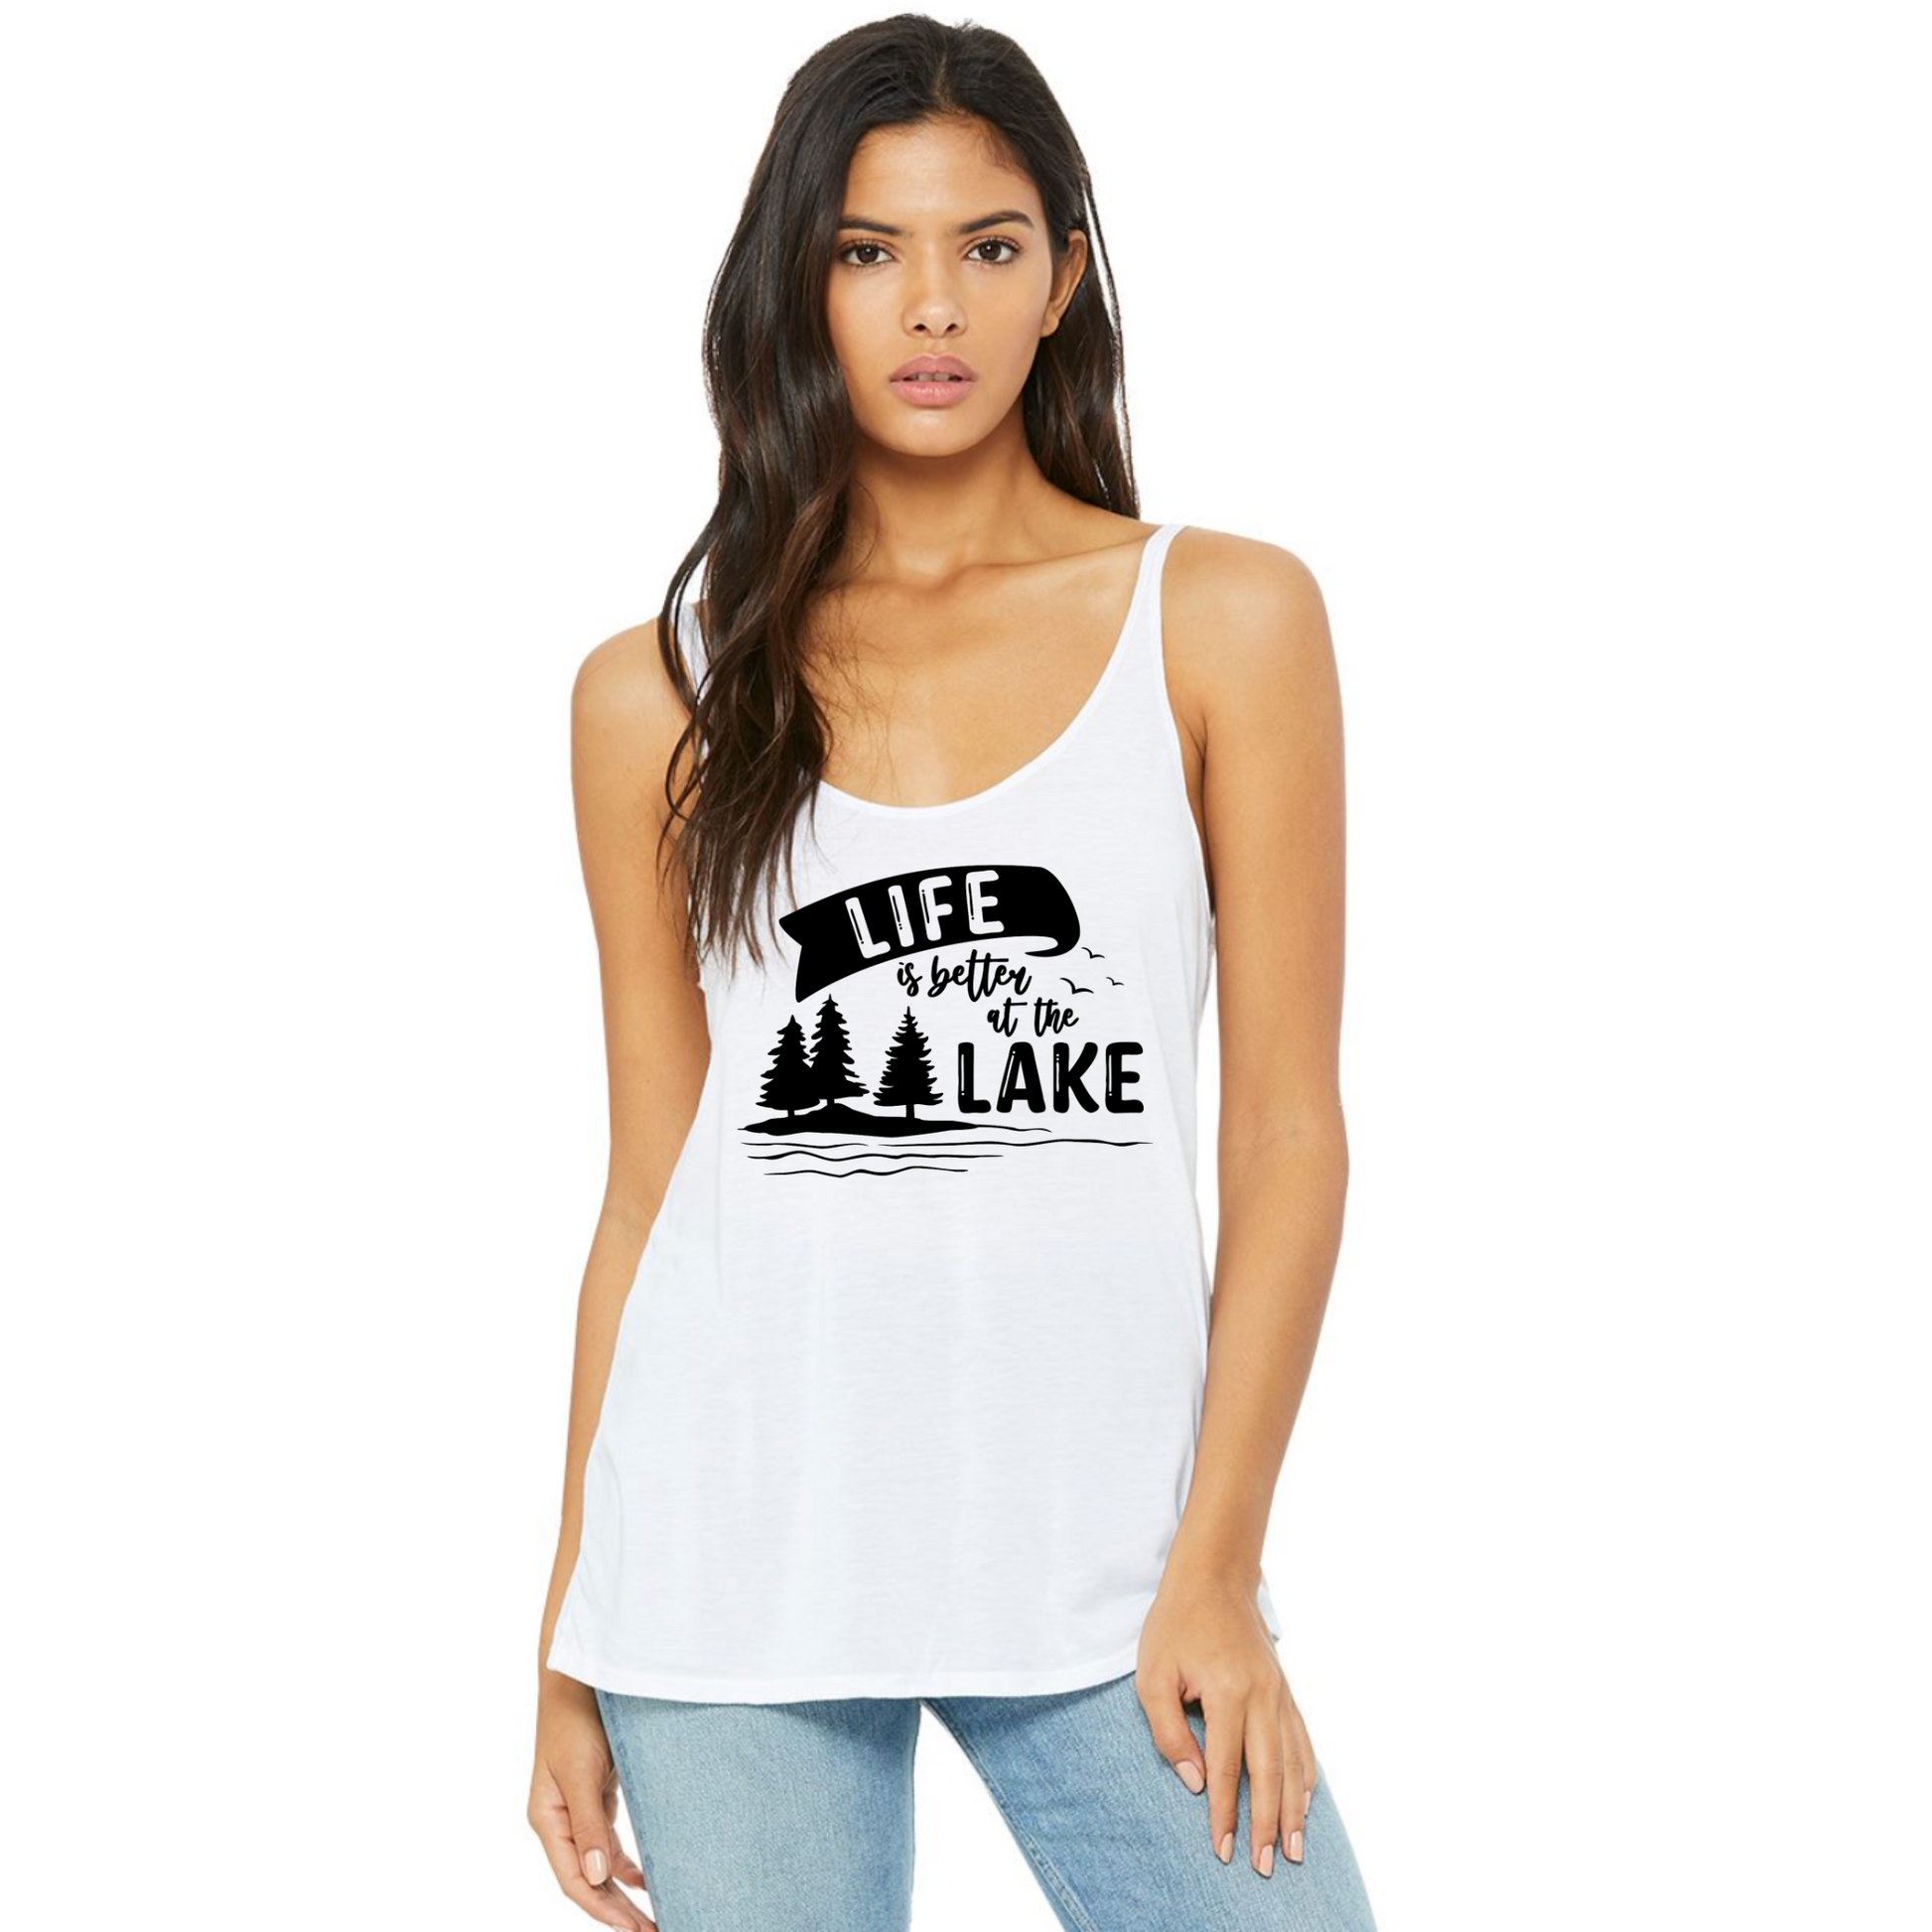 Life Is Better At The Lake Slouchy Tank Top - white - front view on a model